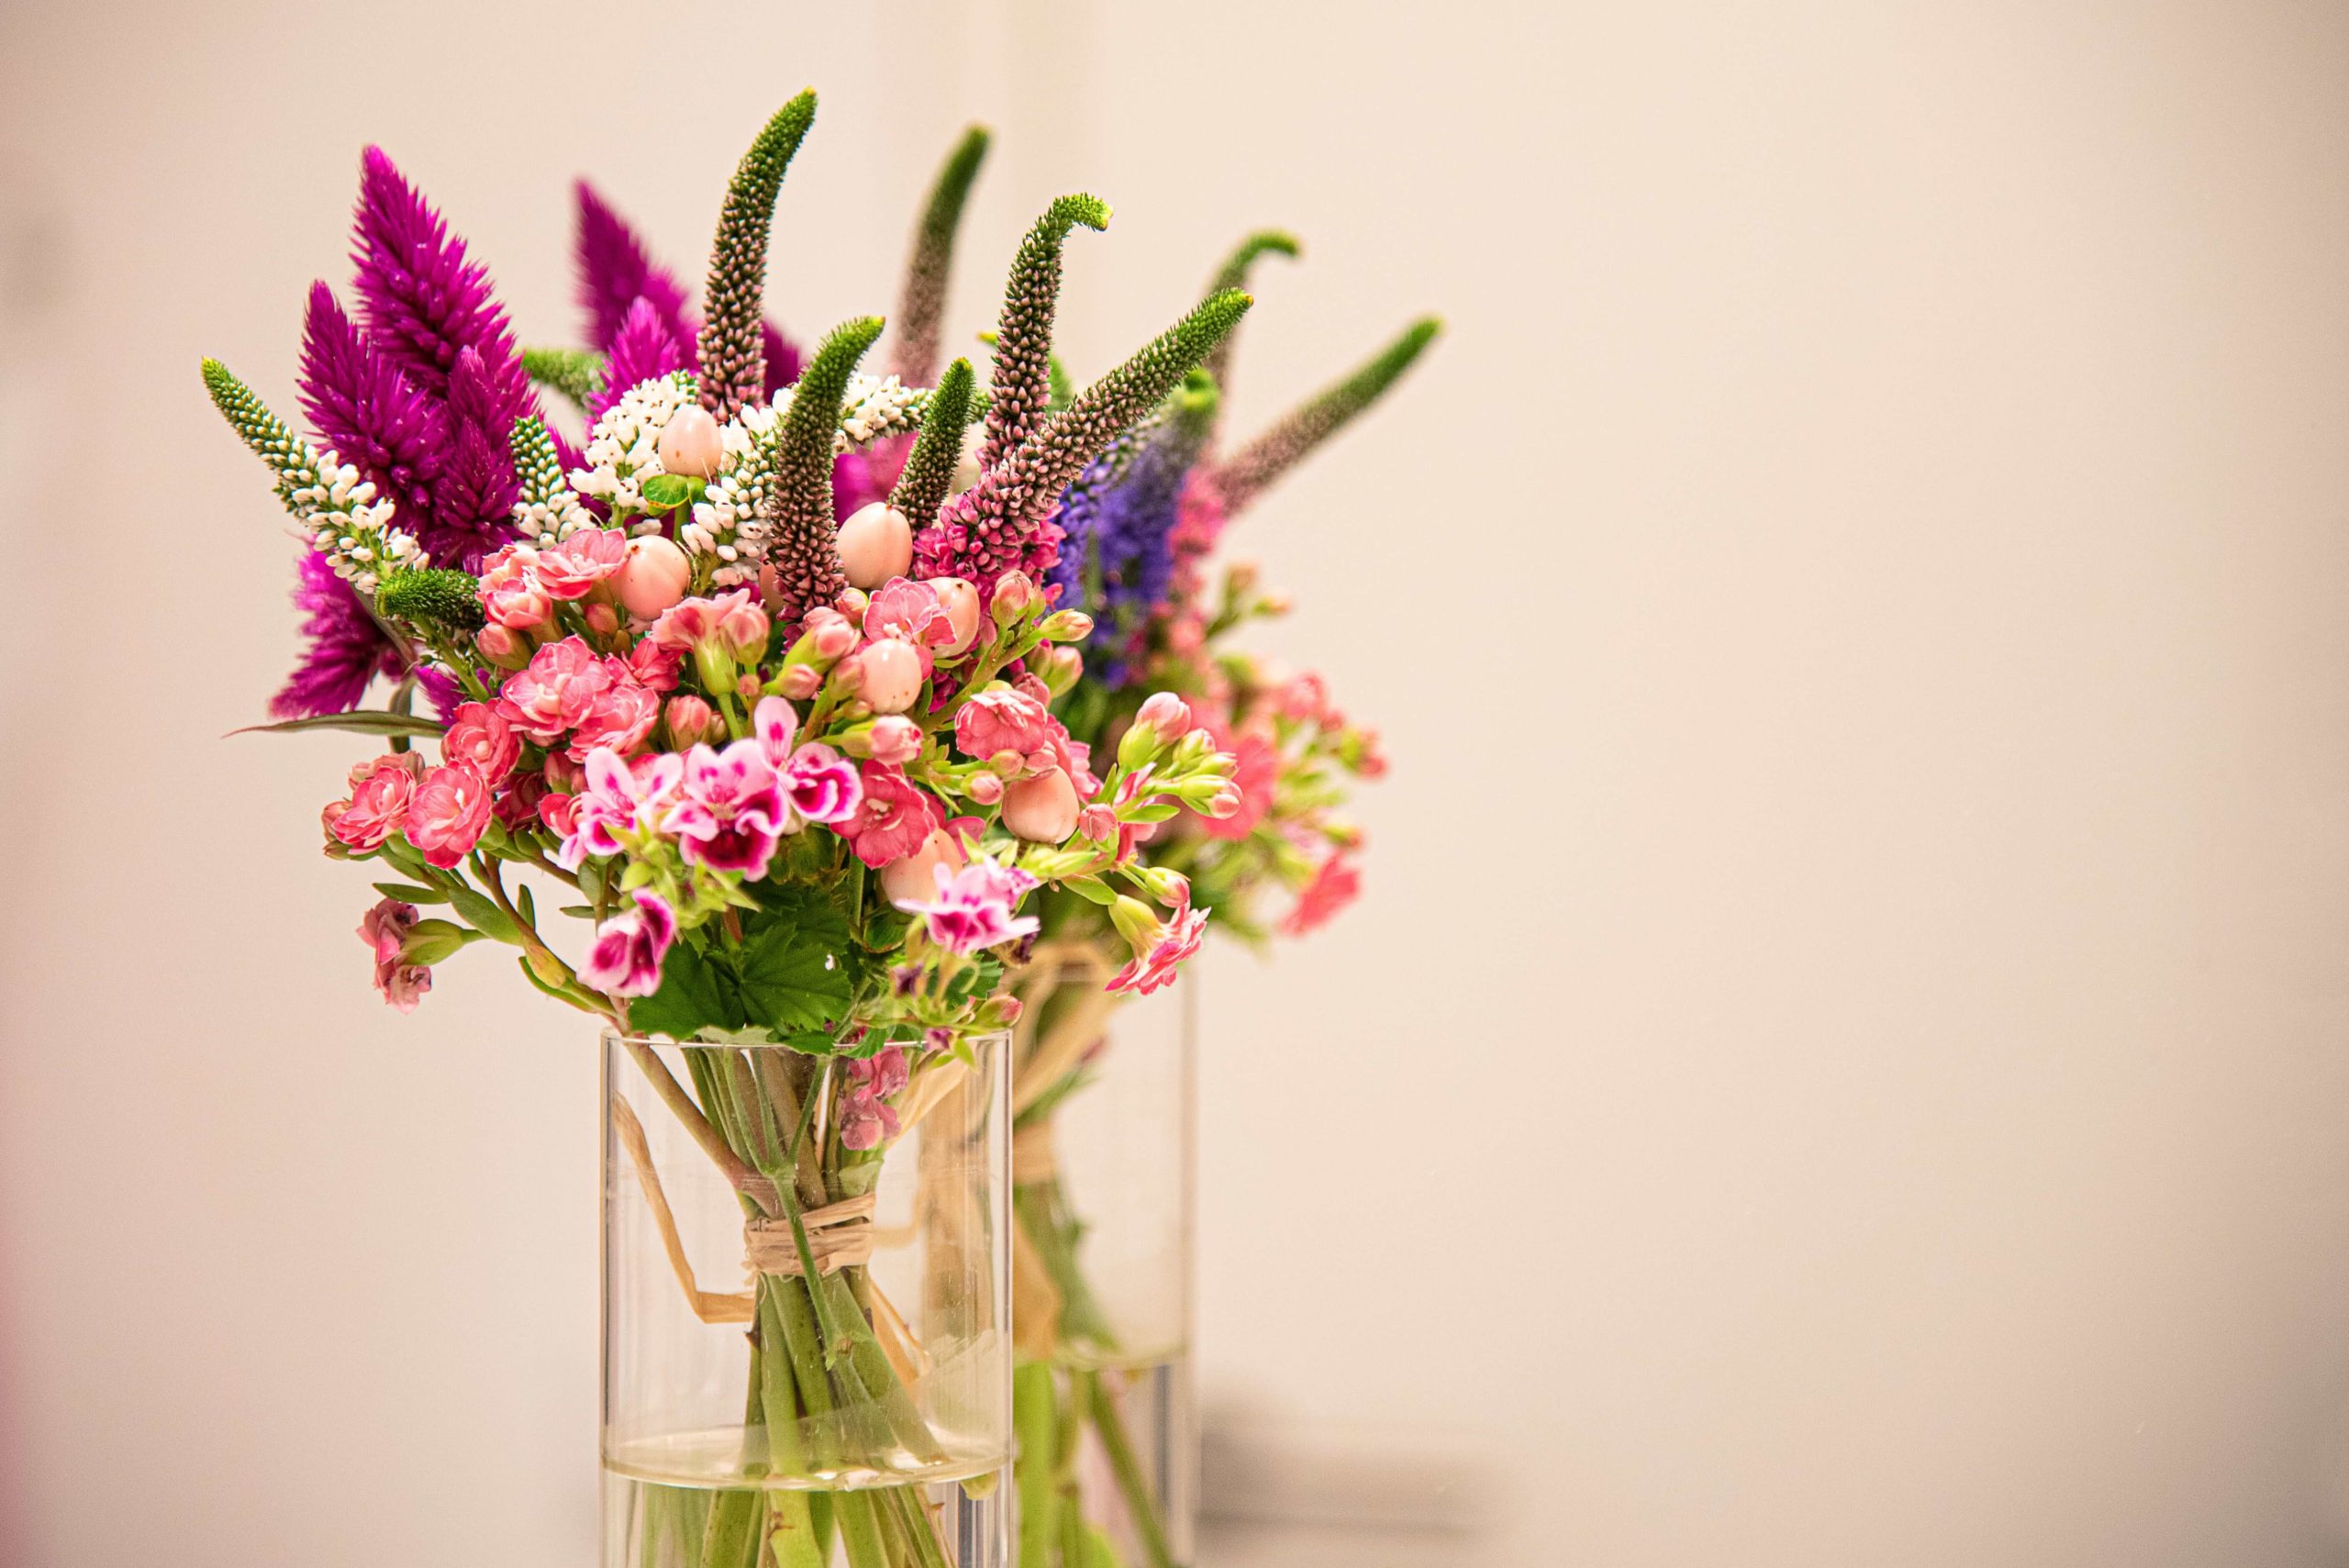 Nontraditional bouquet of colorful flowers